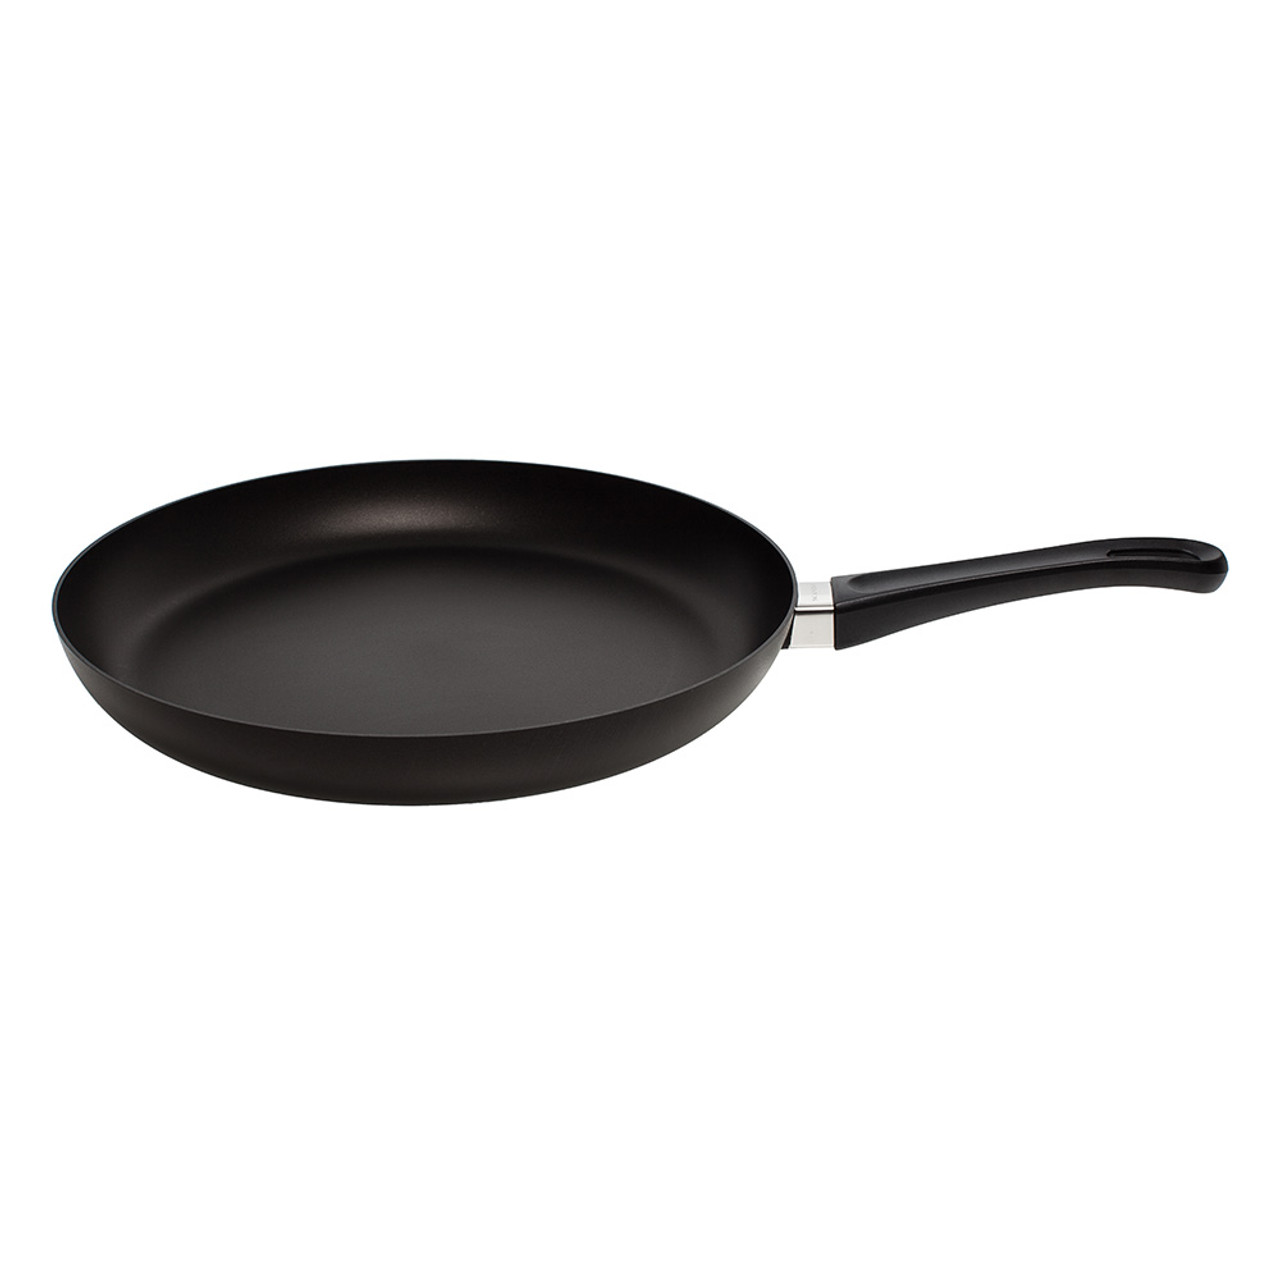 Copper Chef Black Diamond Fry Pan with Lid, Nonstick, 12-In